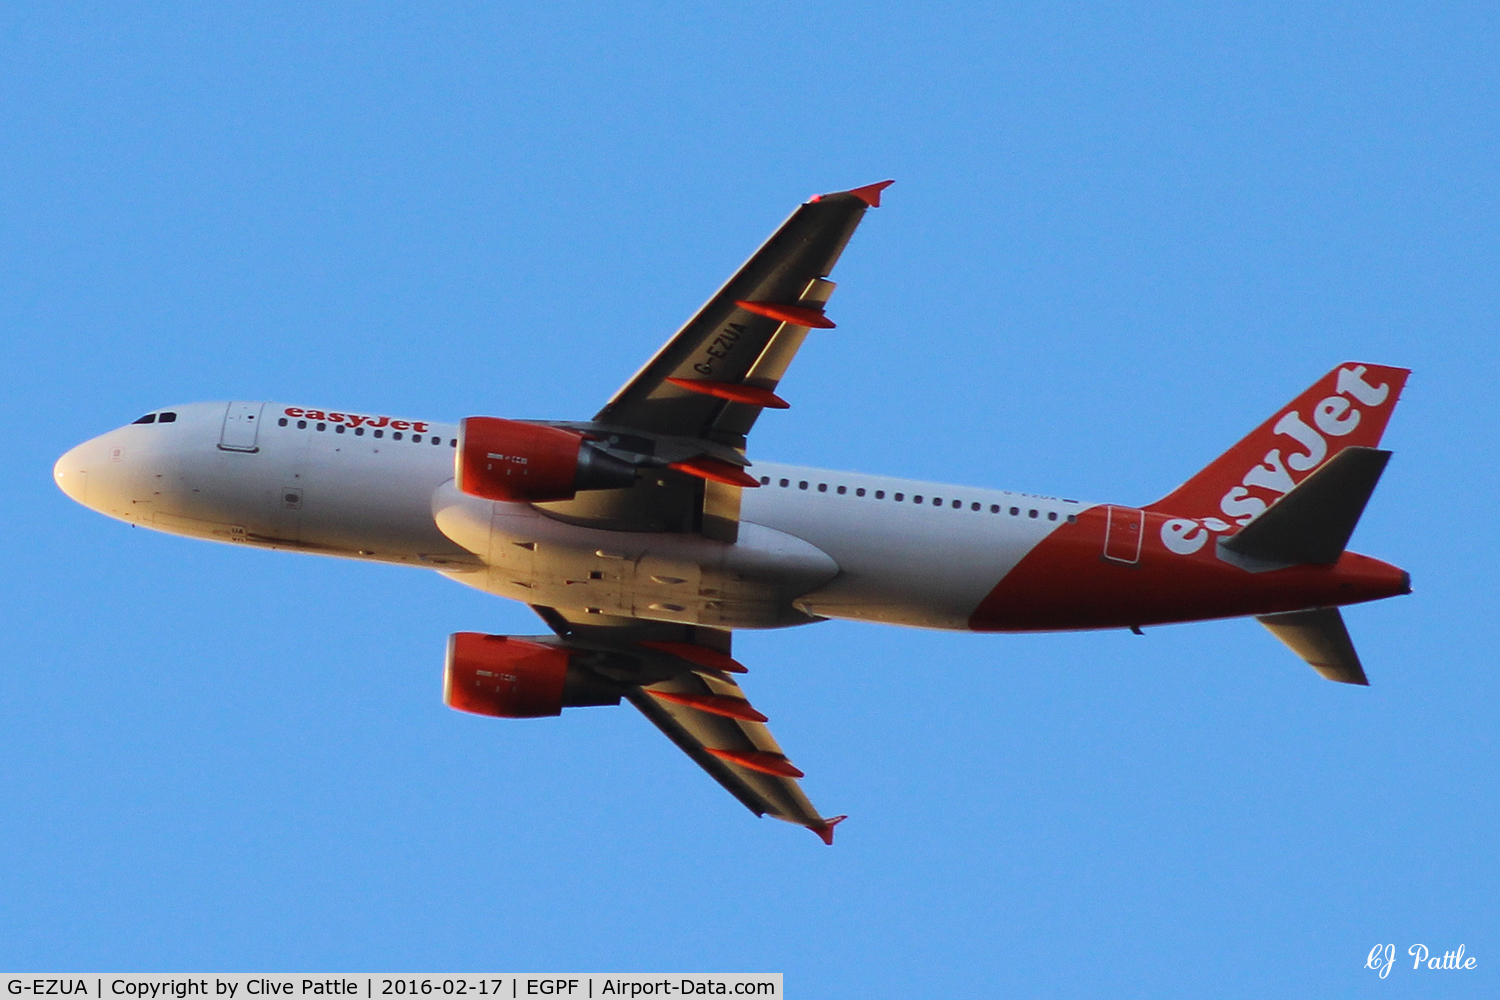 G-EZUA, 2011 Airbus A320-214 C/N 4588, Sunset departure from Glasgow EGPF